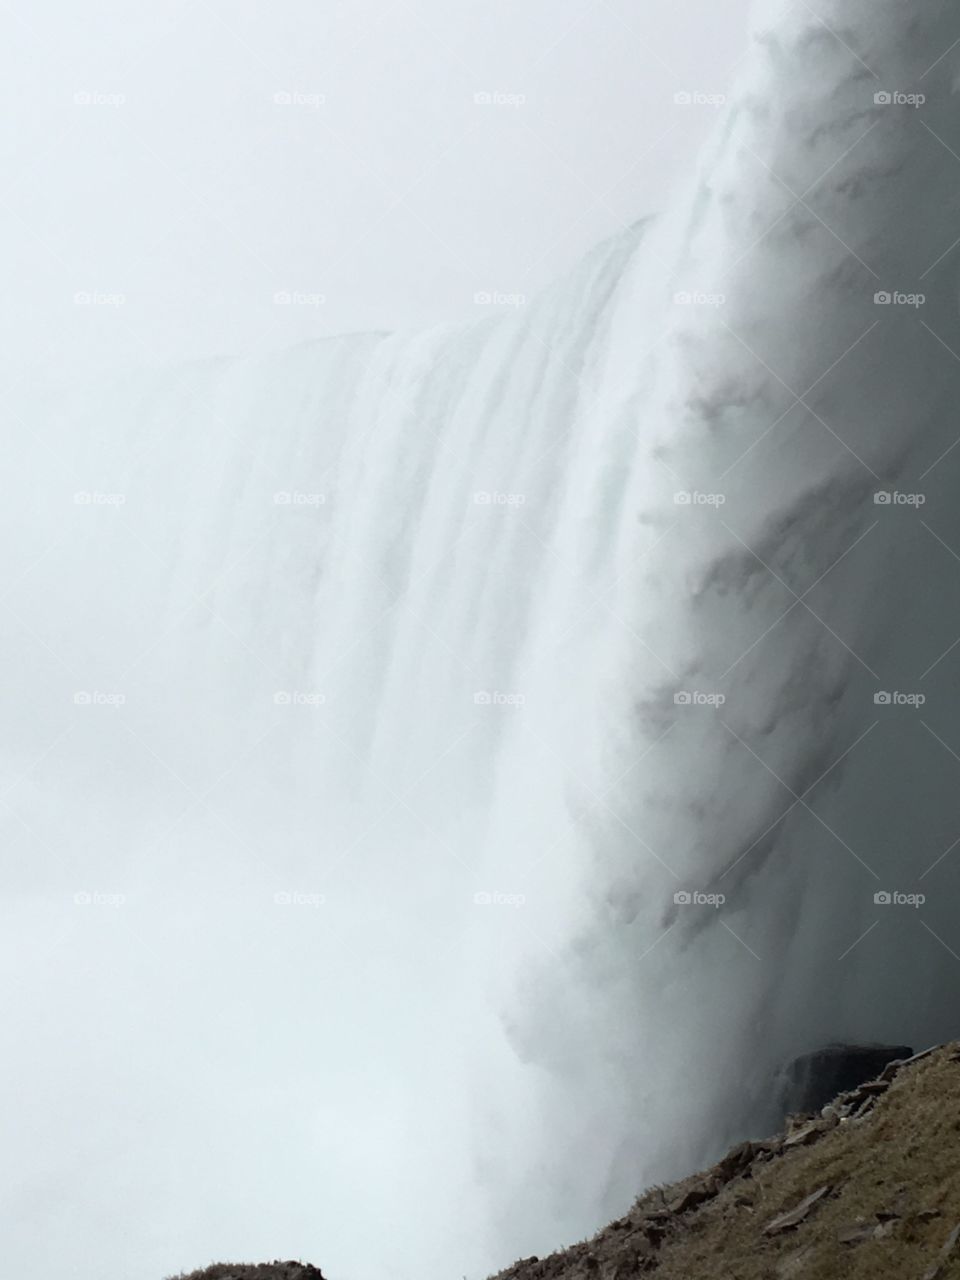 Power of the falls